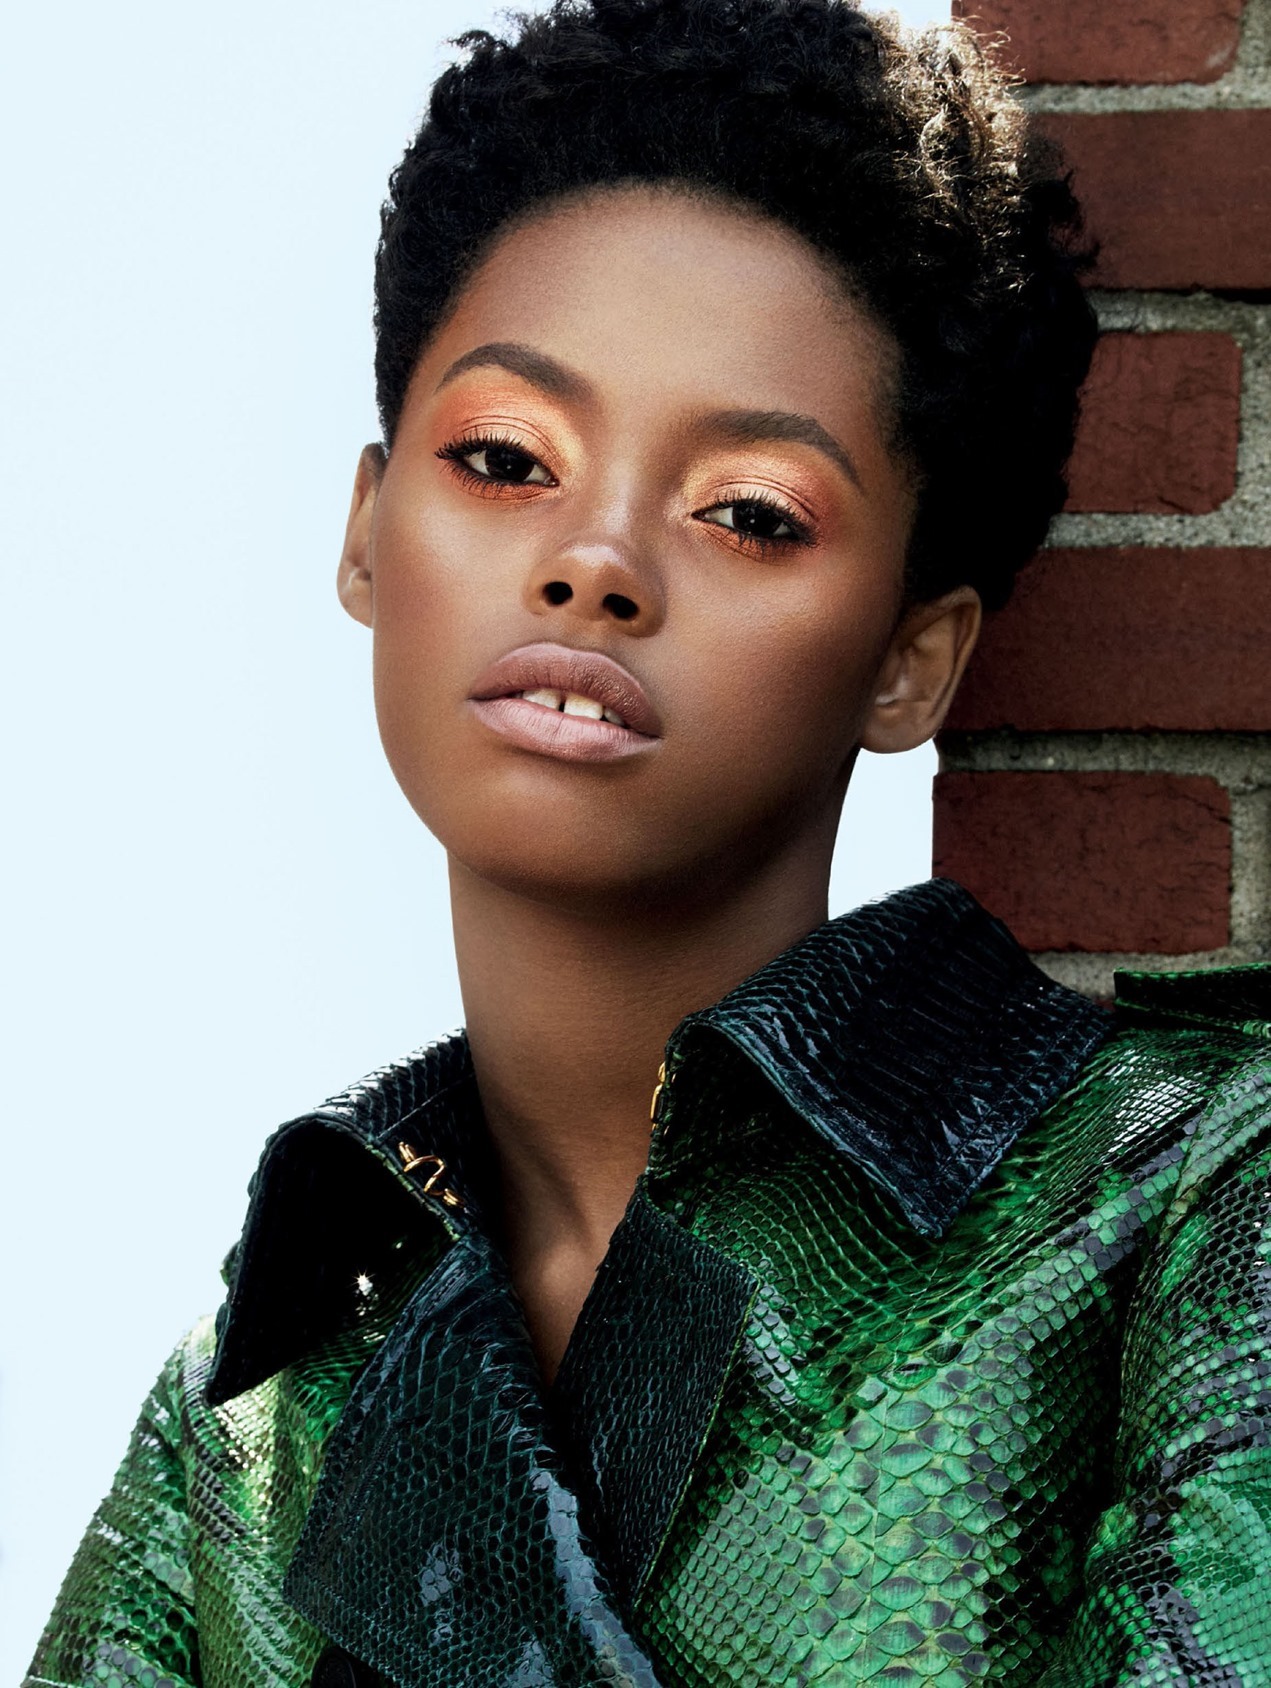 ALLURE MAGAZINE: Londone Myers & Willow Hand by Jason Kibbler - Image ...